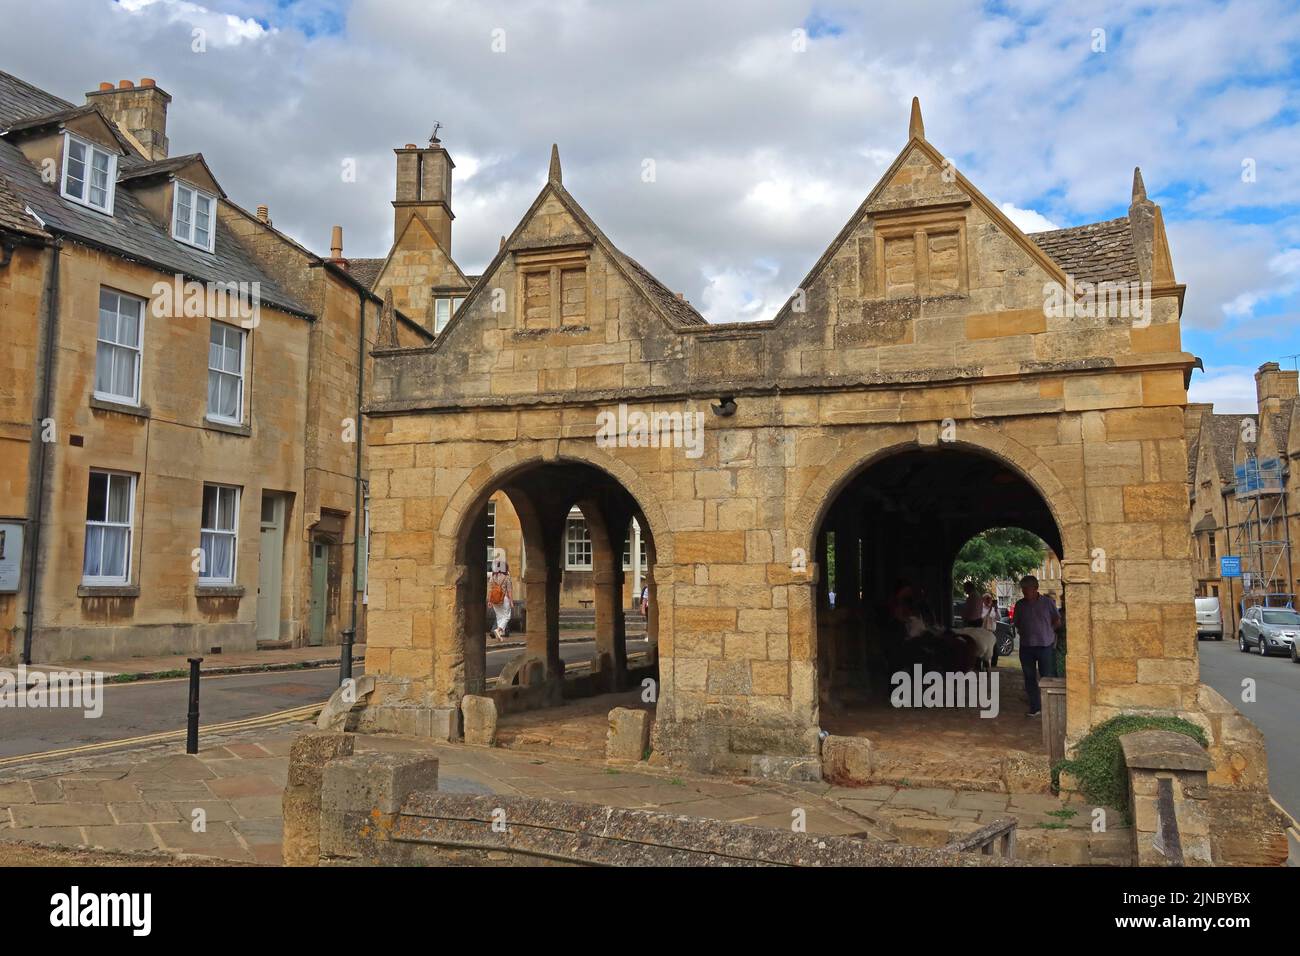 1627 Market Hall , High Street, Chipping Camden, Cotswolds Market Town, Cotswold, Oxfordshire, Angleterre, Royaume-Uni, GL55 6AA Banque D'Images